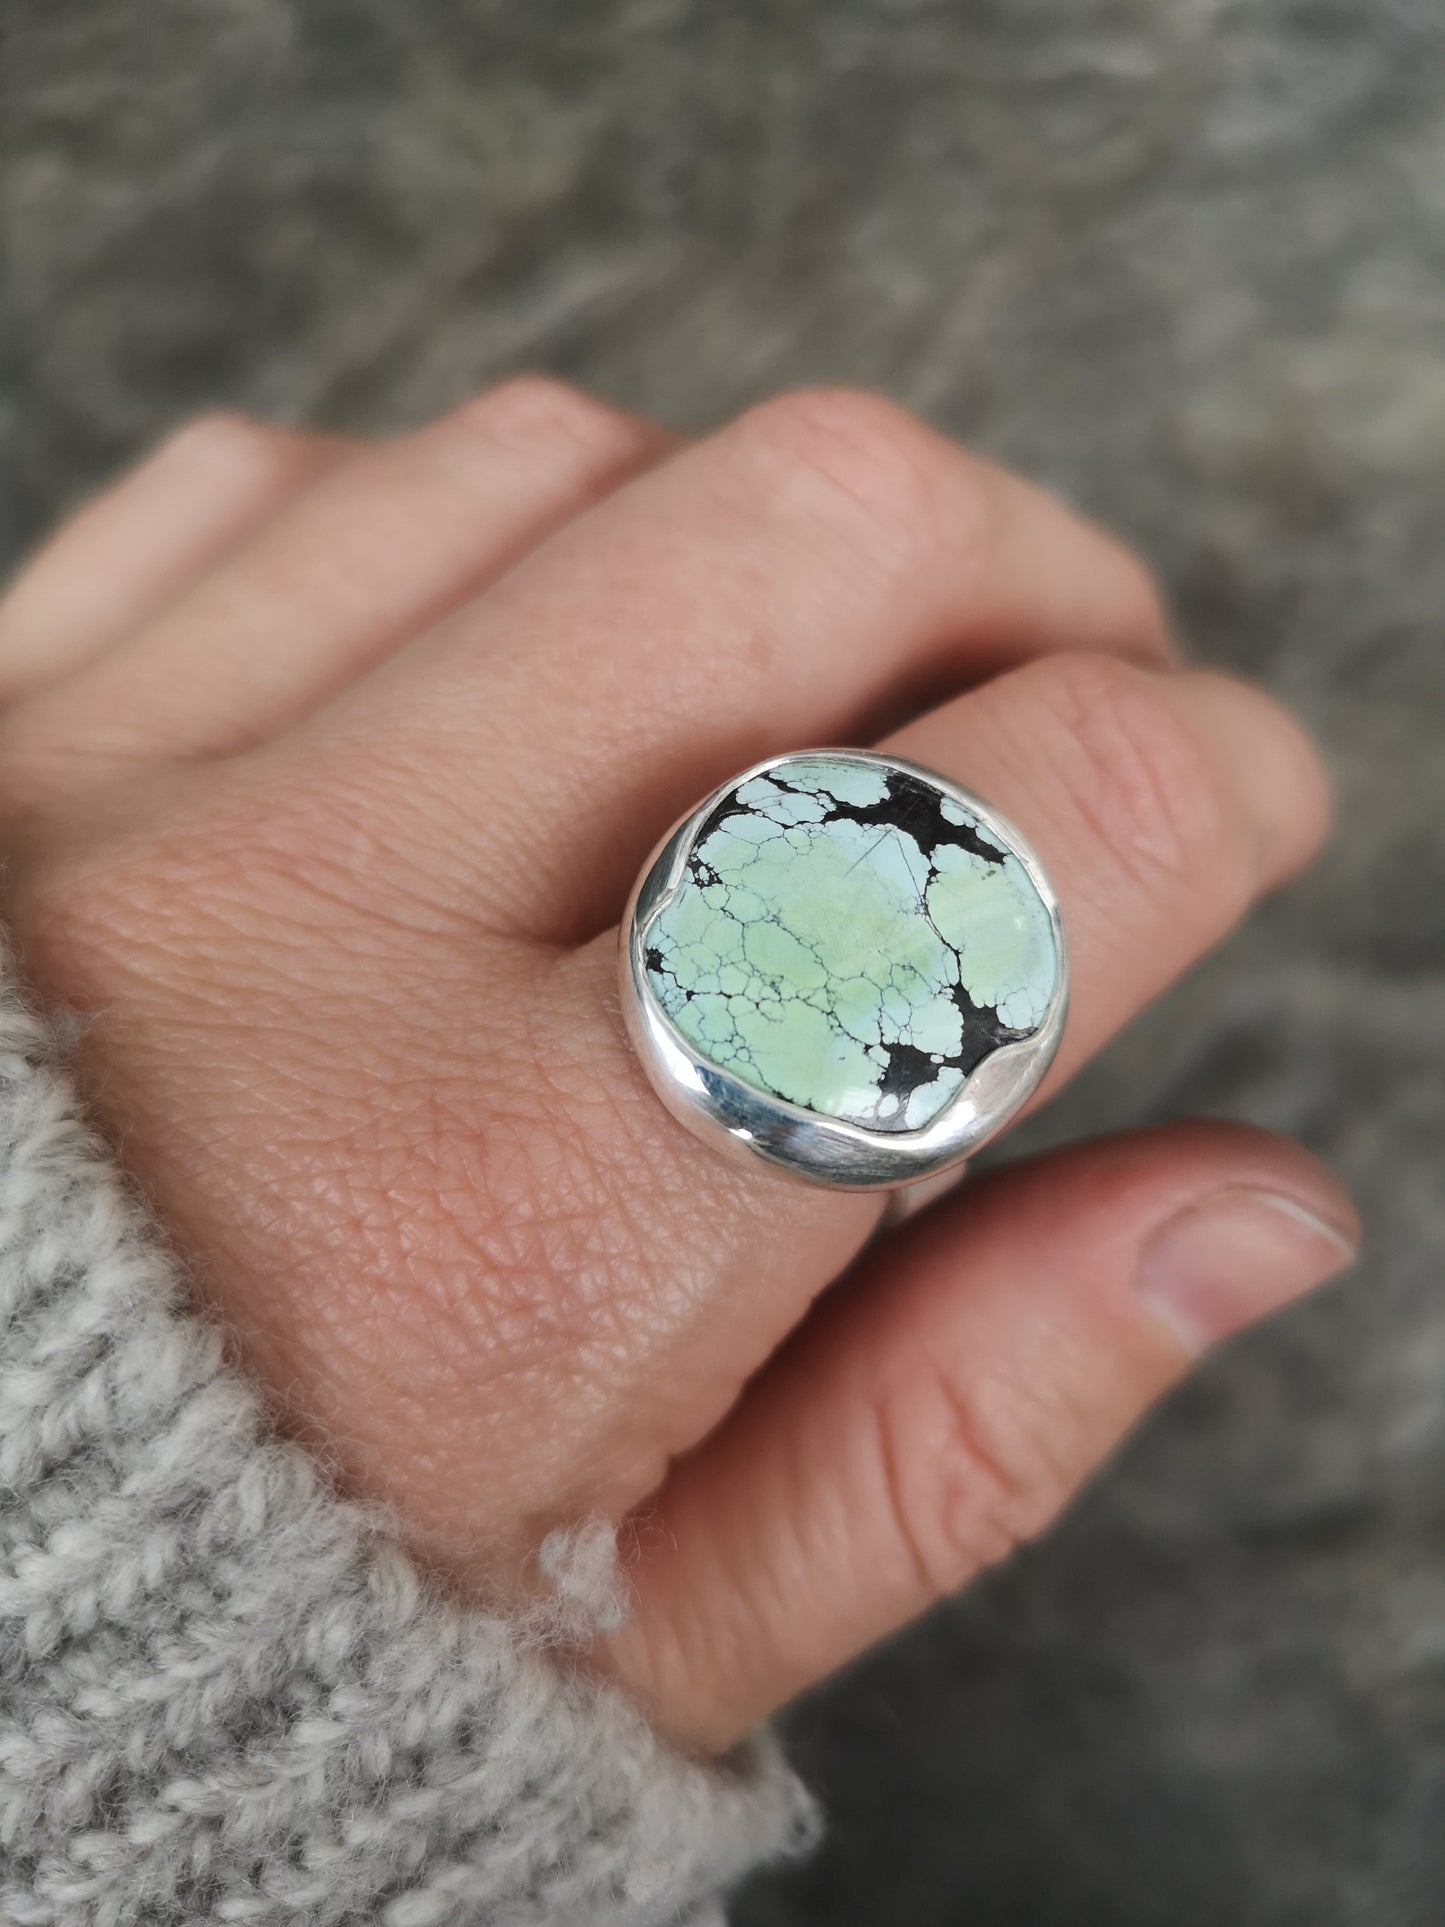 Minty blue-green 'Giraffe' Turquoise Statment Ring